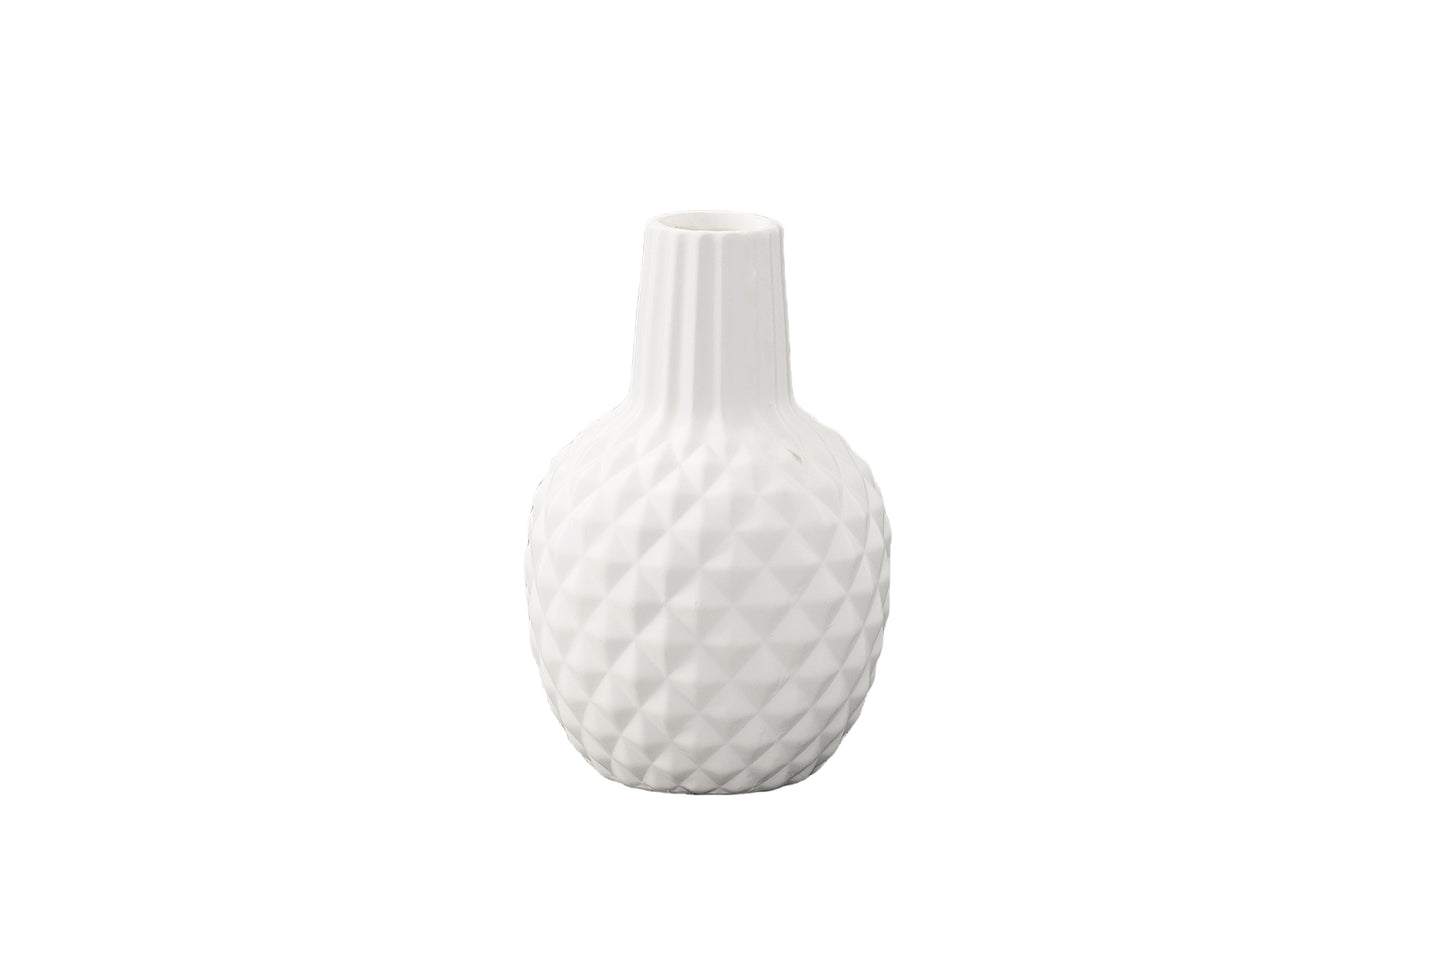 Ceramic Bellied Round Vase with Long Engraved Parallel Lines Design Neck, Engraved Diamond Design Body and Tapered Bottom Matte Finish White